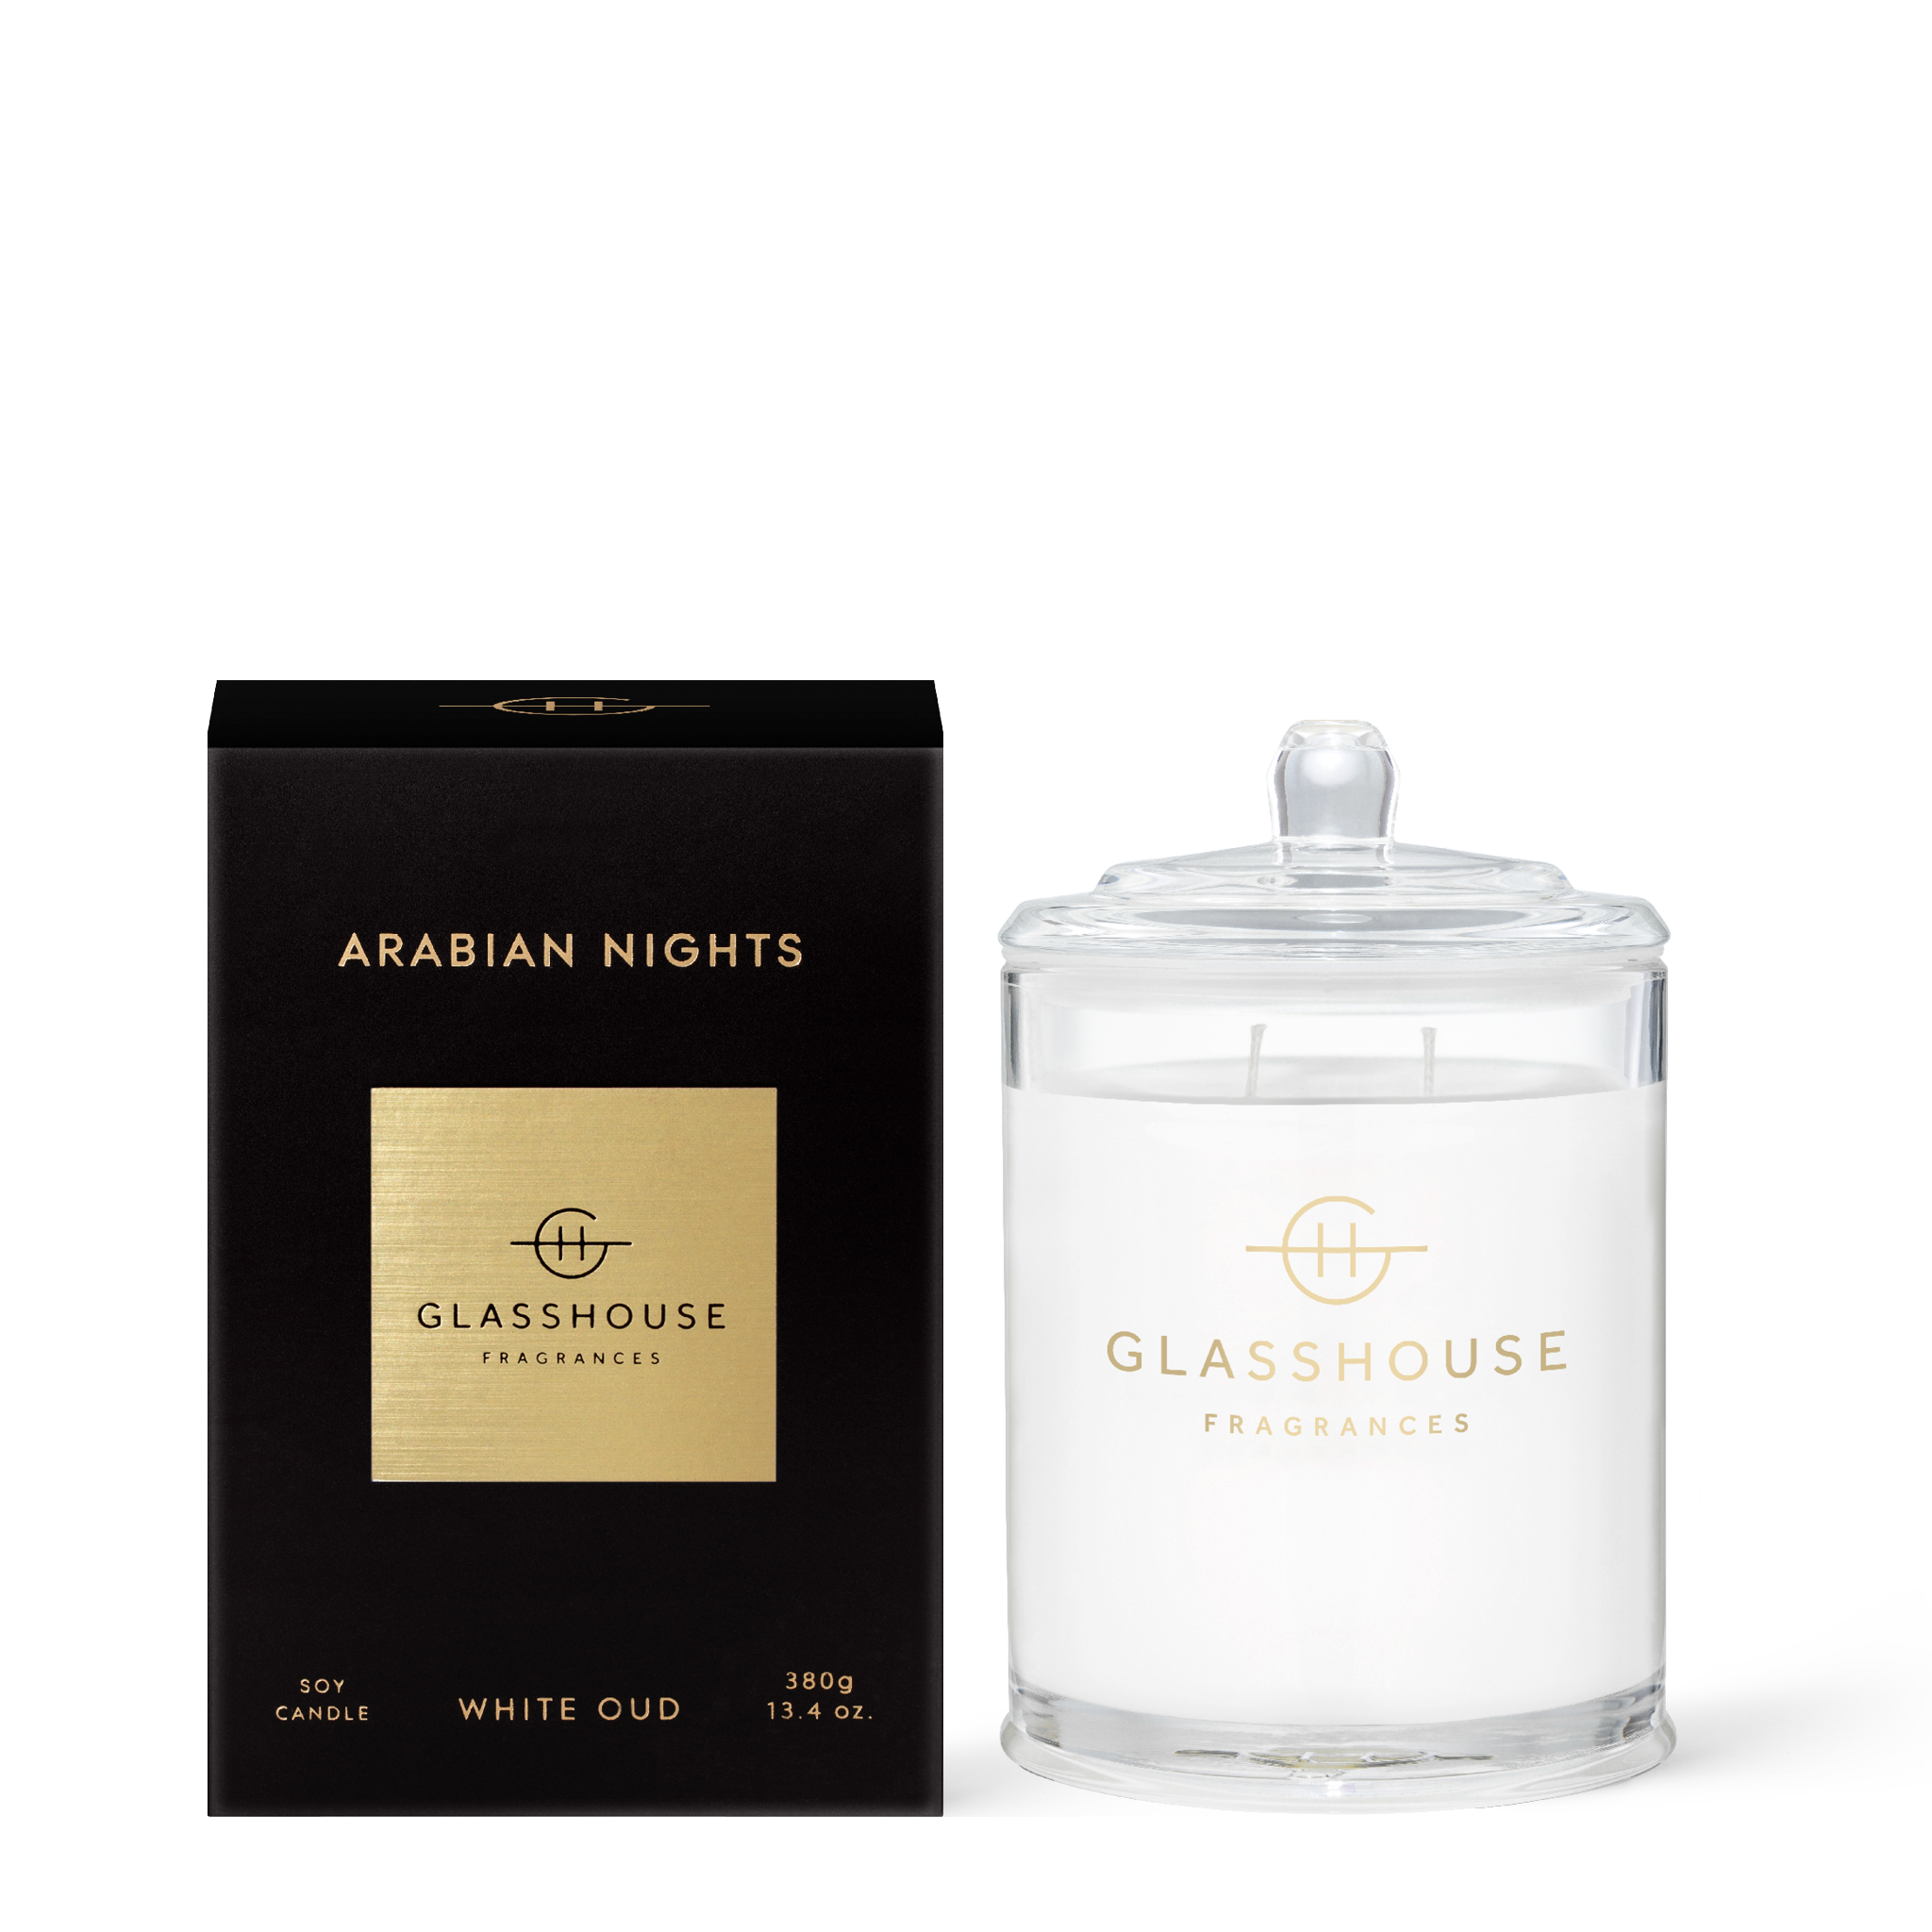 Glasshouse Fragrances Arabian Nights White Oud 380g Soy Candle with box